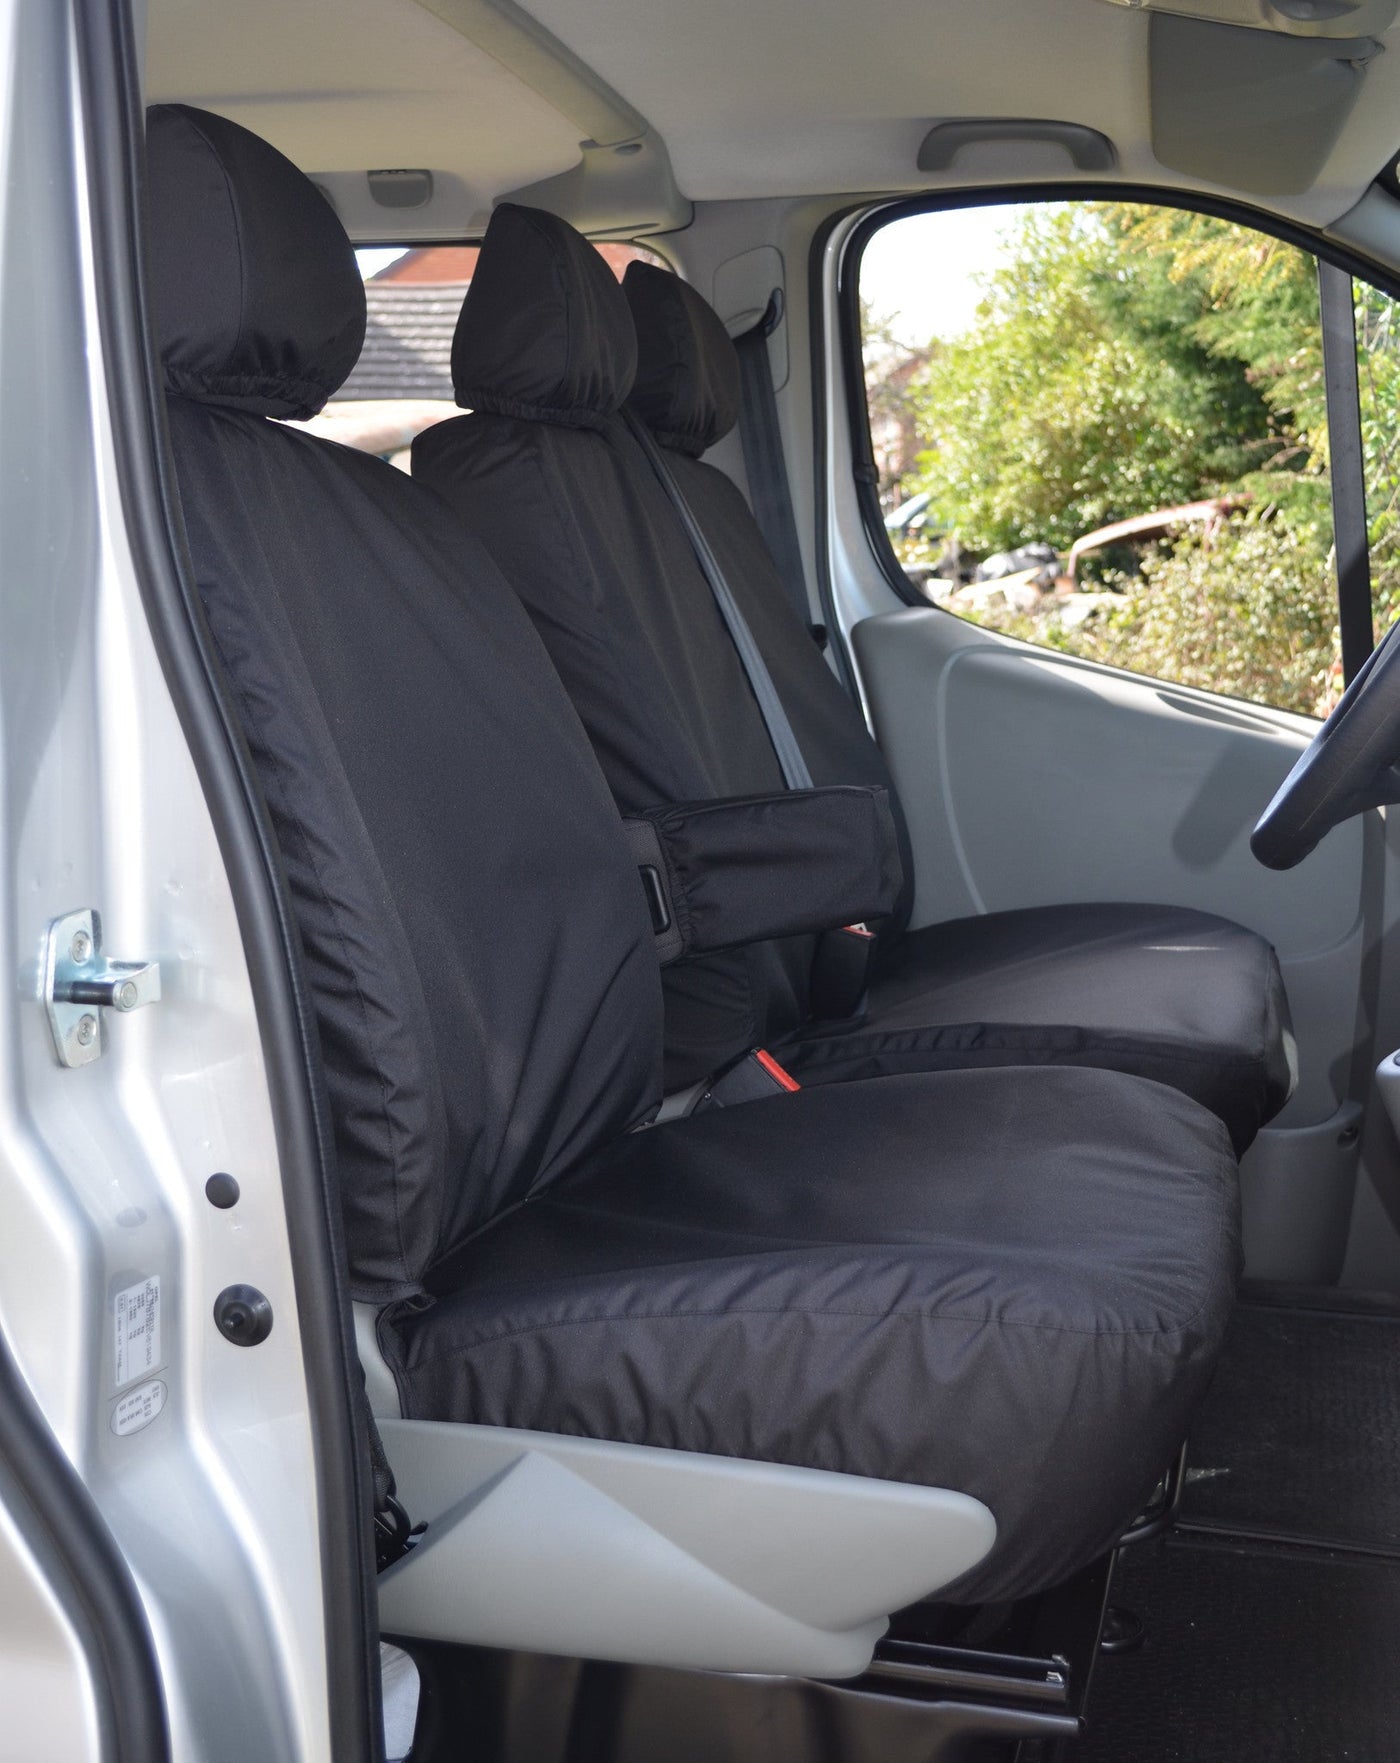 Nissan Primastar 2006 - 2014 Tailored Front Seat Covers Black / With Driver's Armrest Scutes Ltd